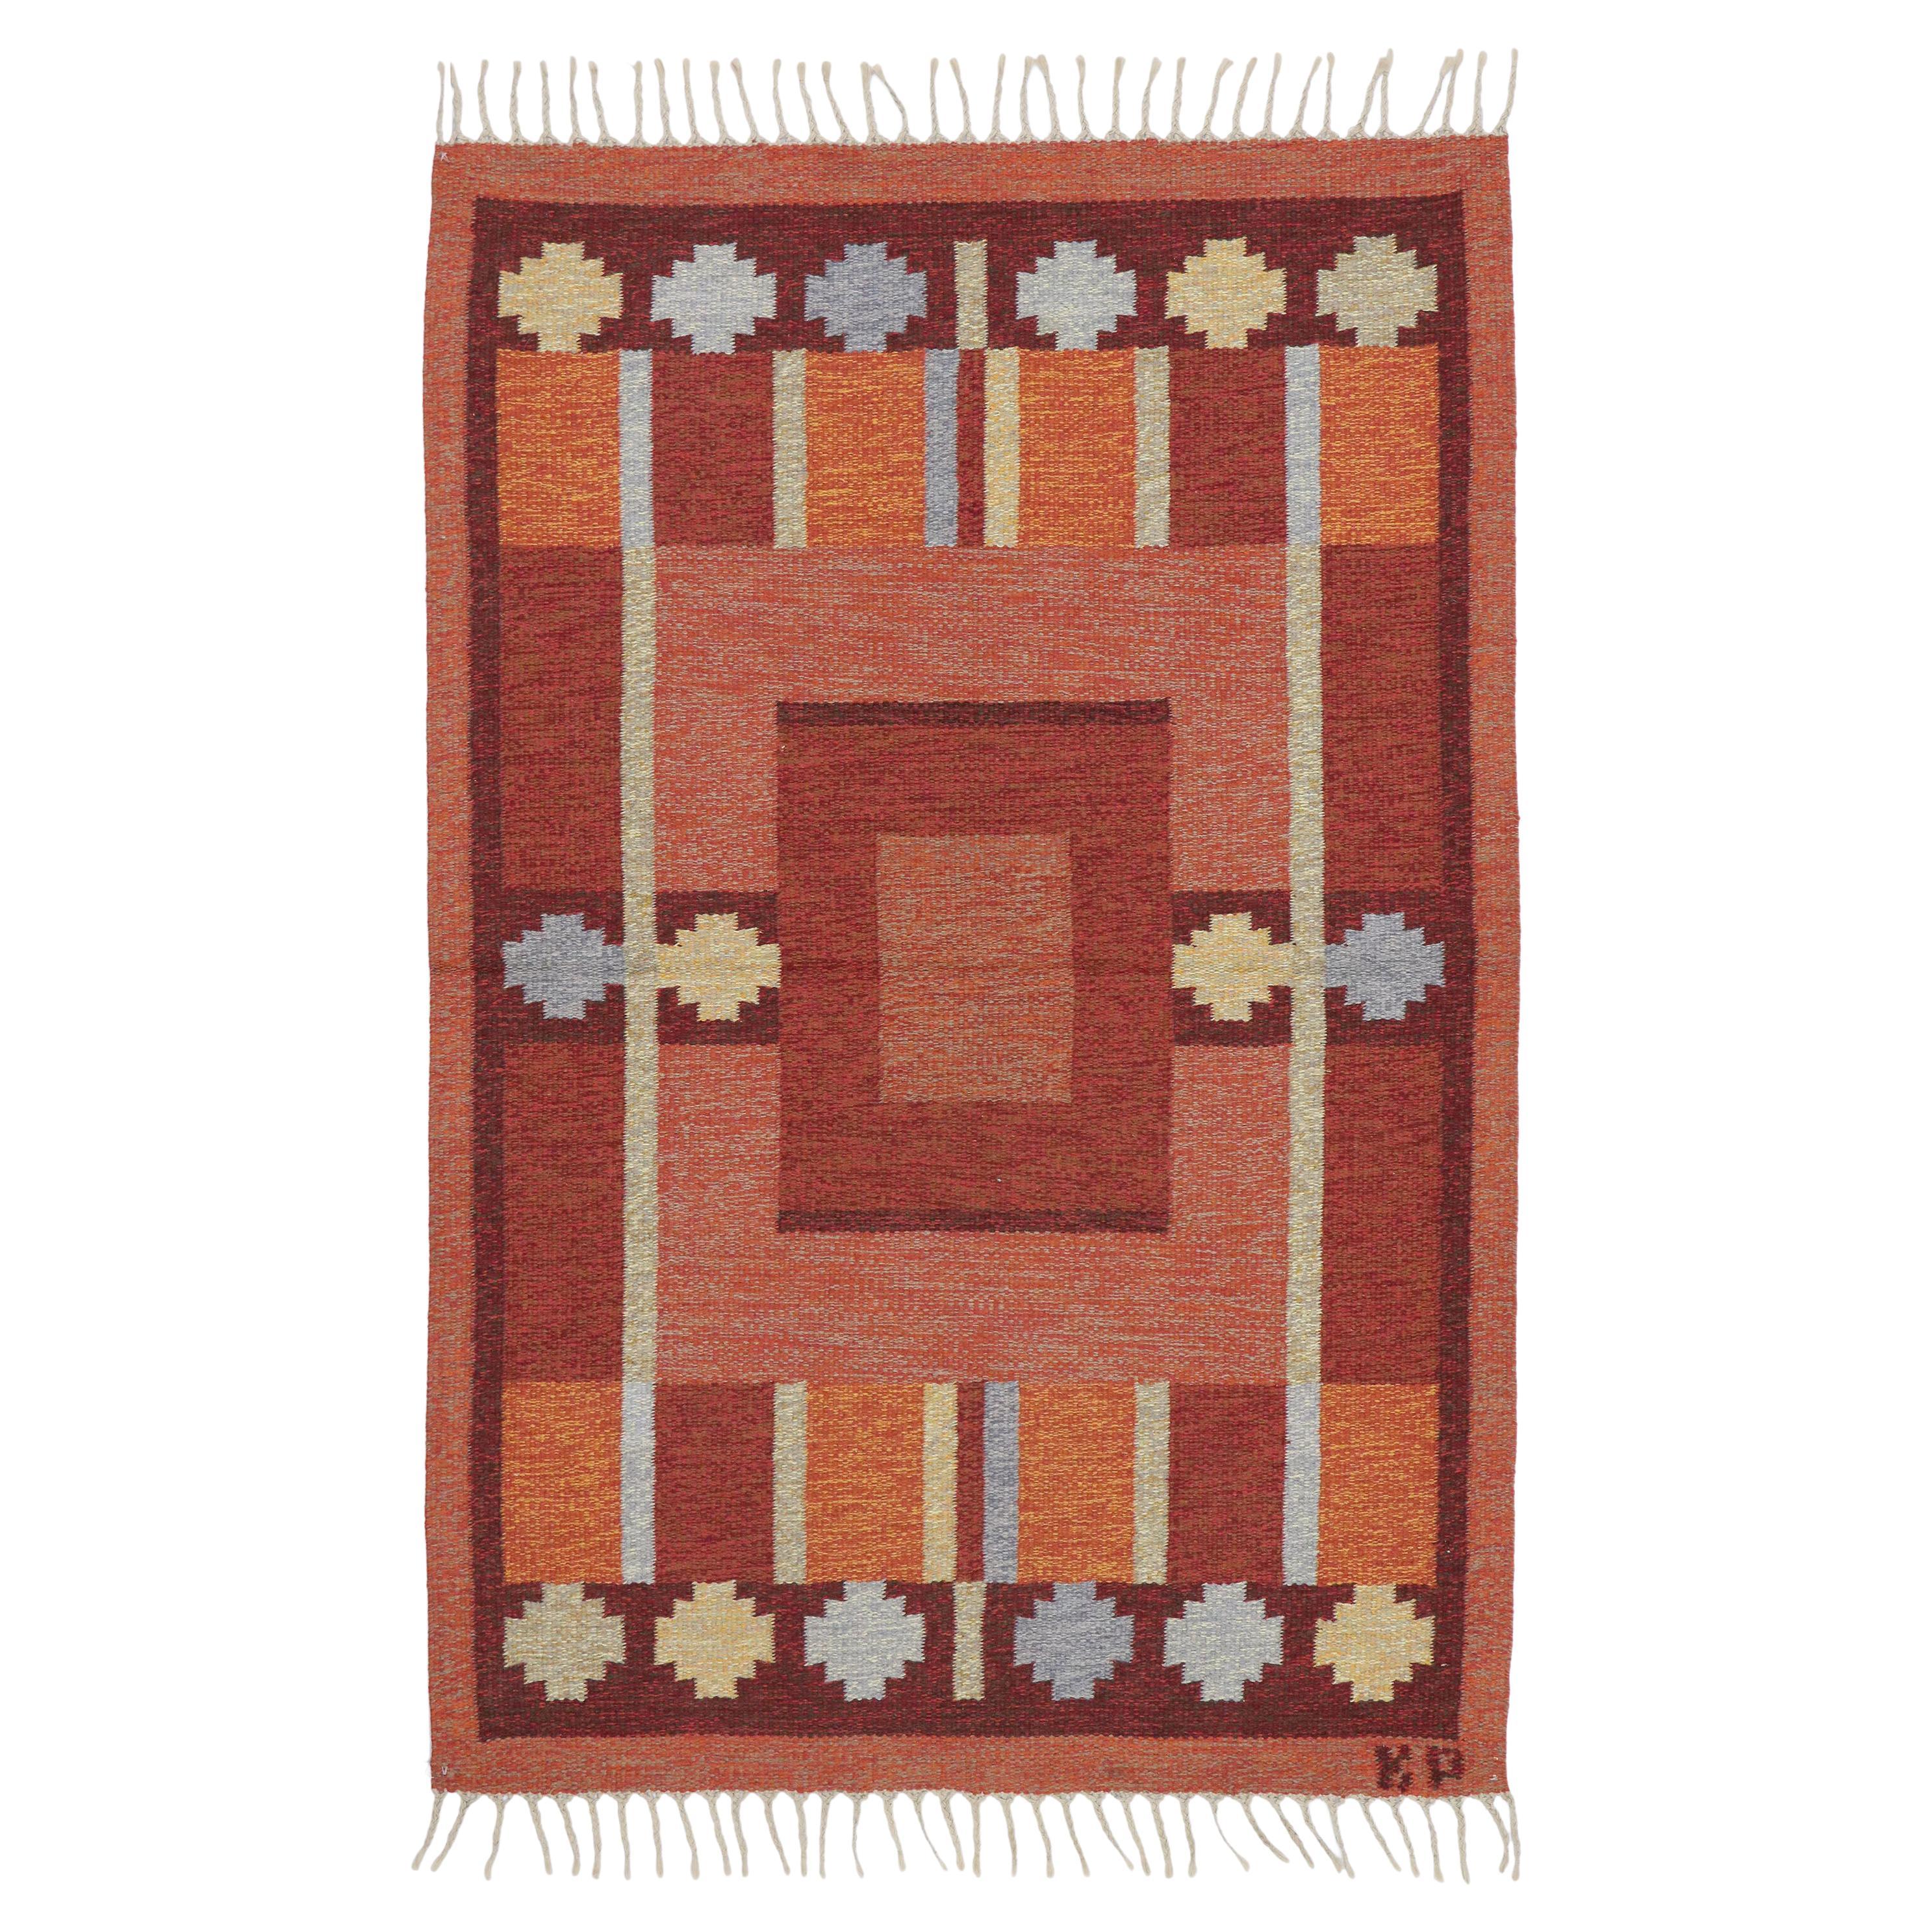 Vintage Swedish Kilim Rug with Scandinavian Modern Style by Kerstin Persson  For Sale